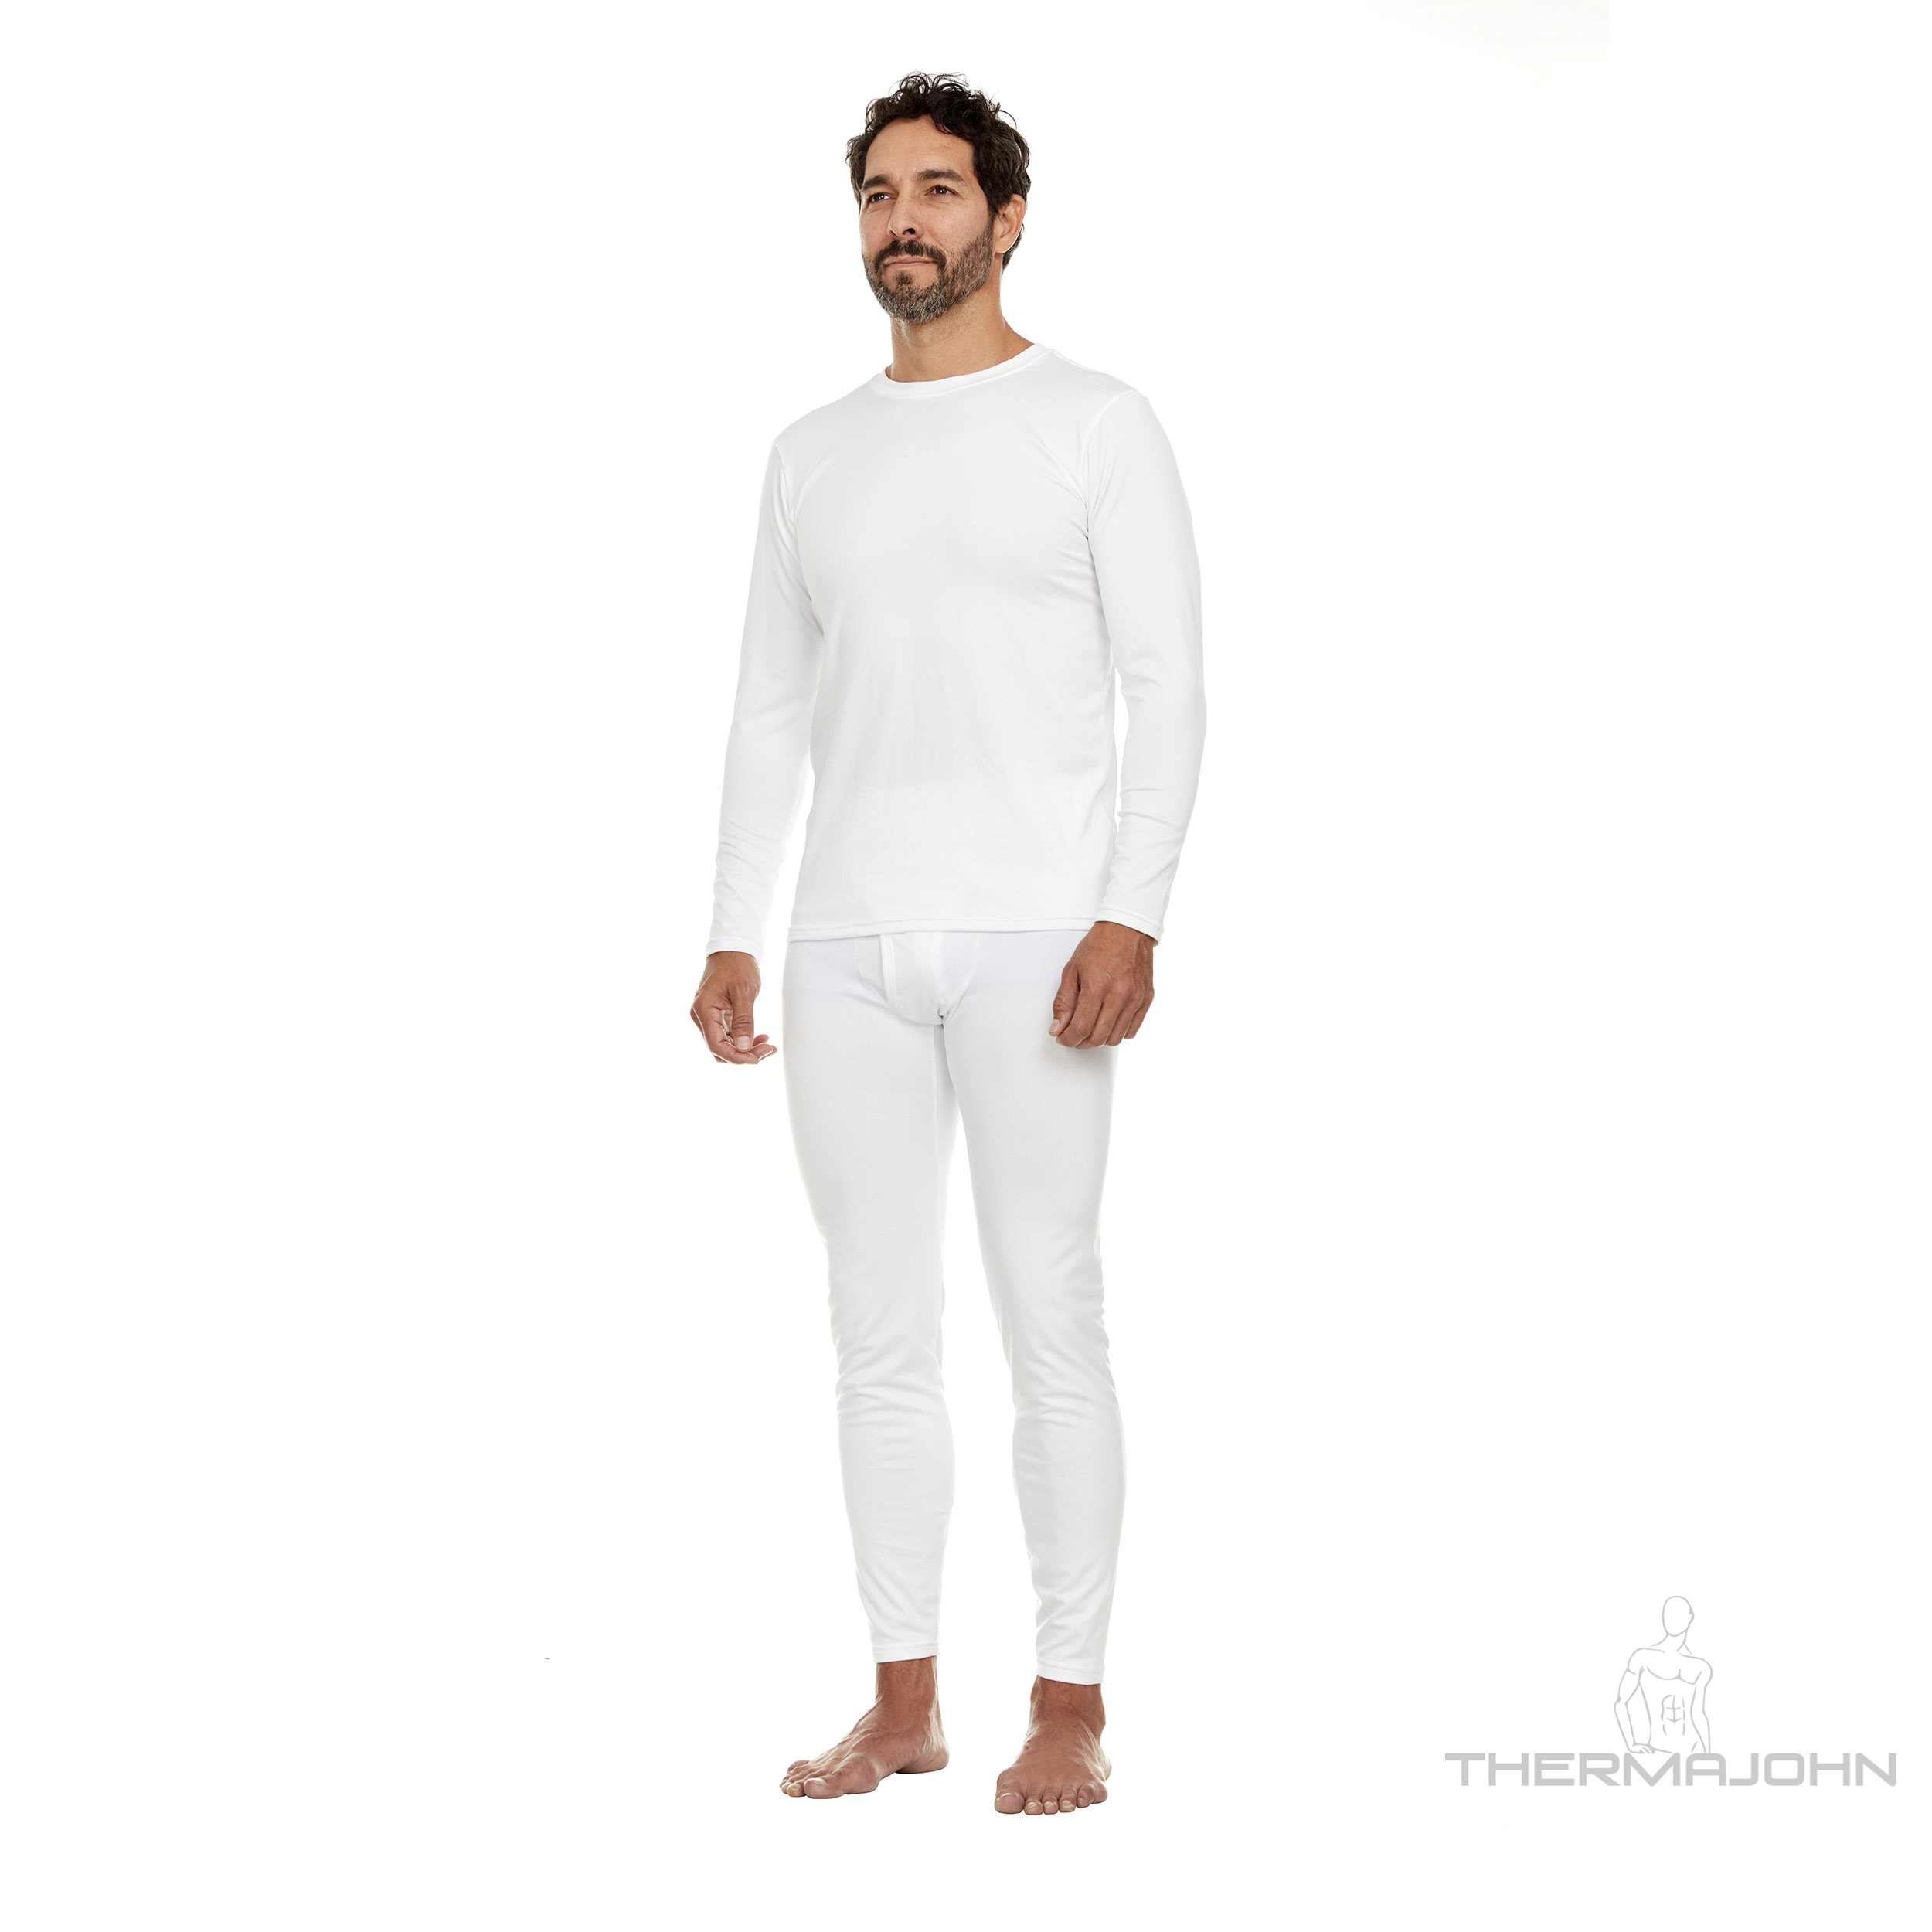 Thermajohn Long Johns Thermal Underwear for Men Fleece Lined Base Layer Set  for Cold Weather